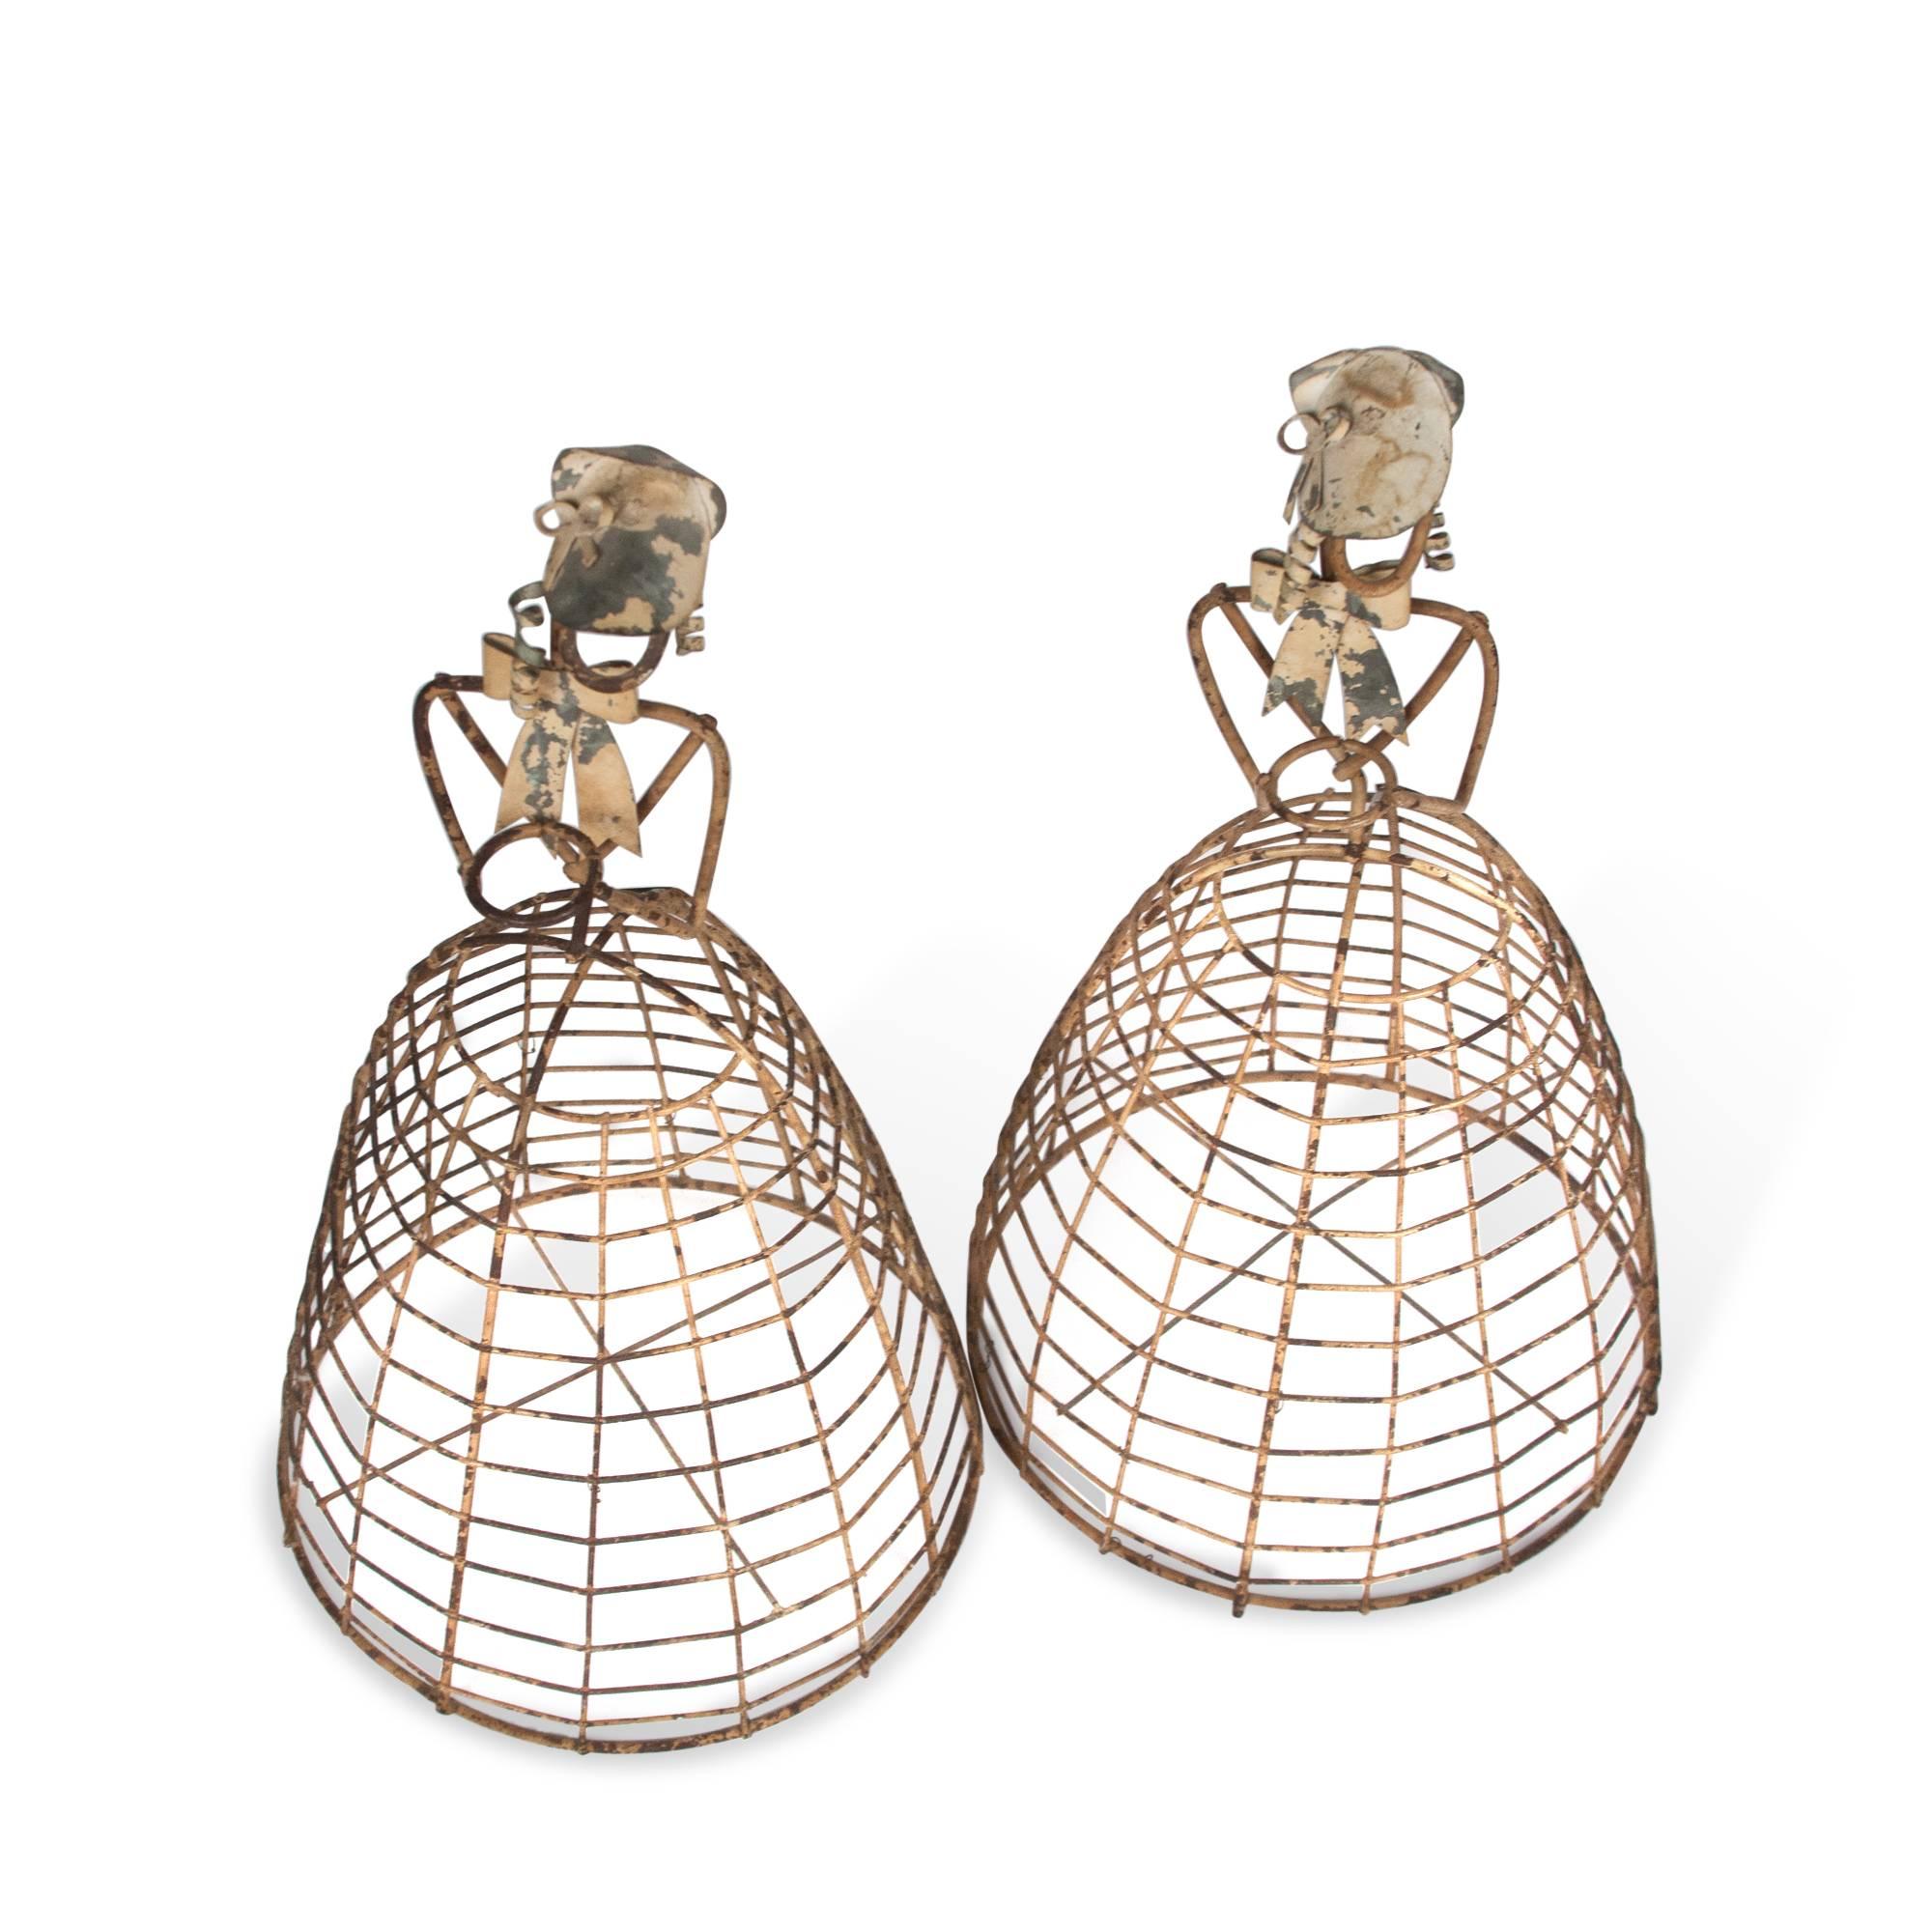 Two painted wire planters in the form of a woman in a dress, by Colette Gueden for Primavera, French, 1940s. Measures: 7” D x 13” H. (Item #3567)

Condition: Some wear and natural aging to metal, losses to paint, a couple detached elements.